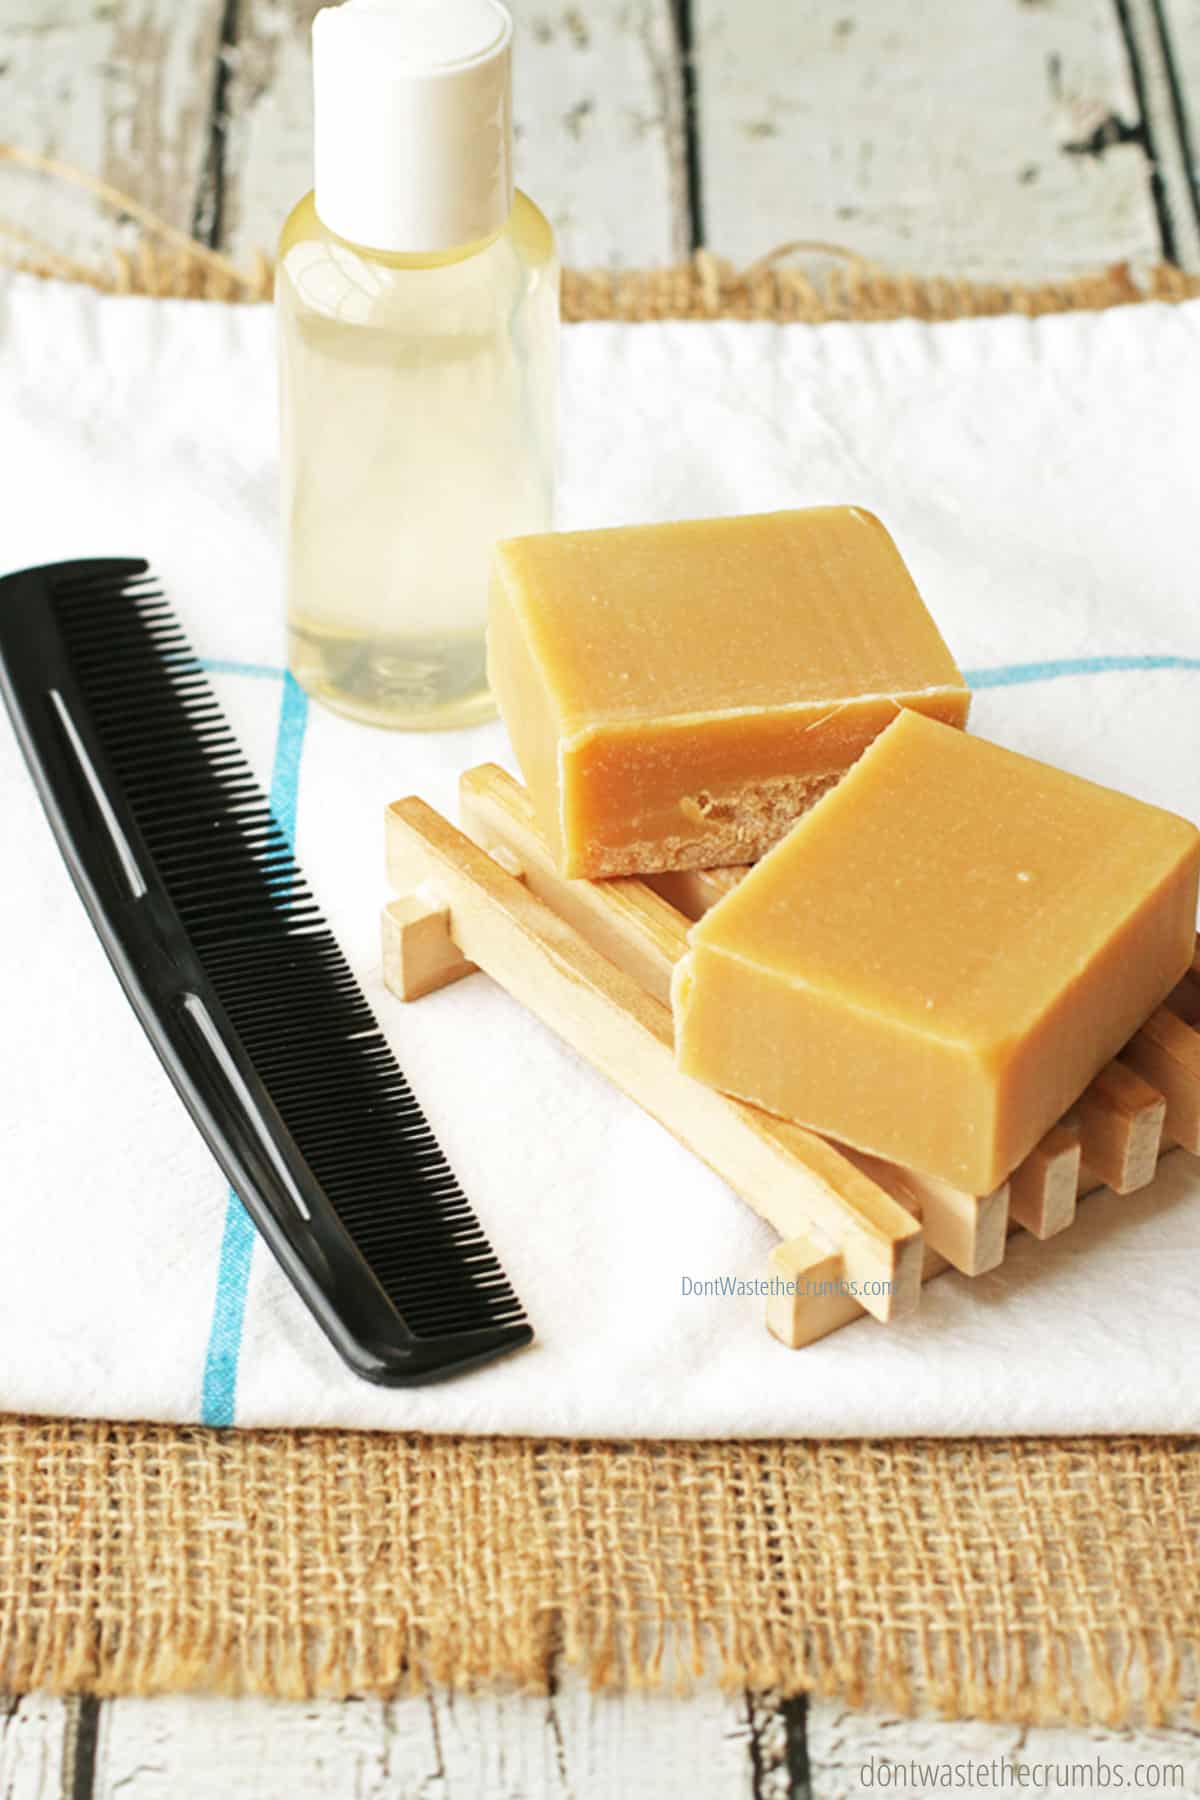 Two bars of goat milk soap, a bottle of liquid soap, and a black comb